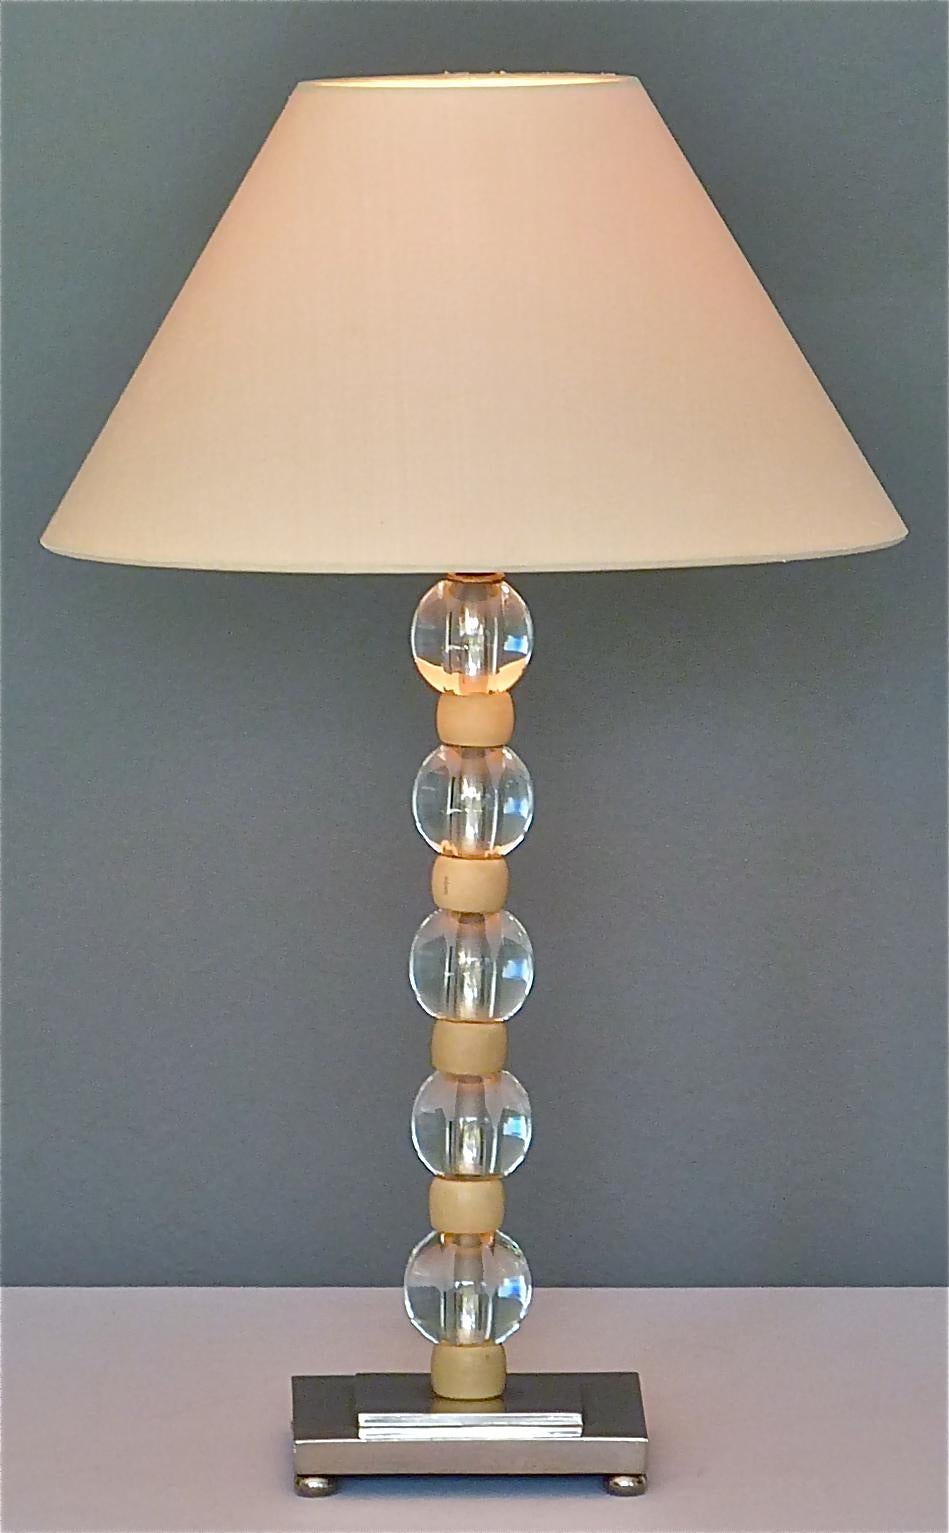 French Art Deco Adnet Baccarat Style Table Lamp Chrome Glass Ivory Color 1930s For Sale 7